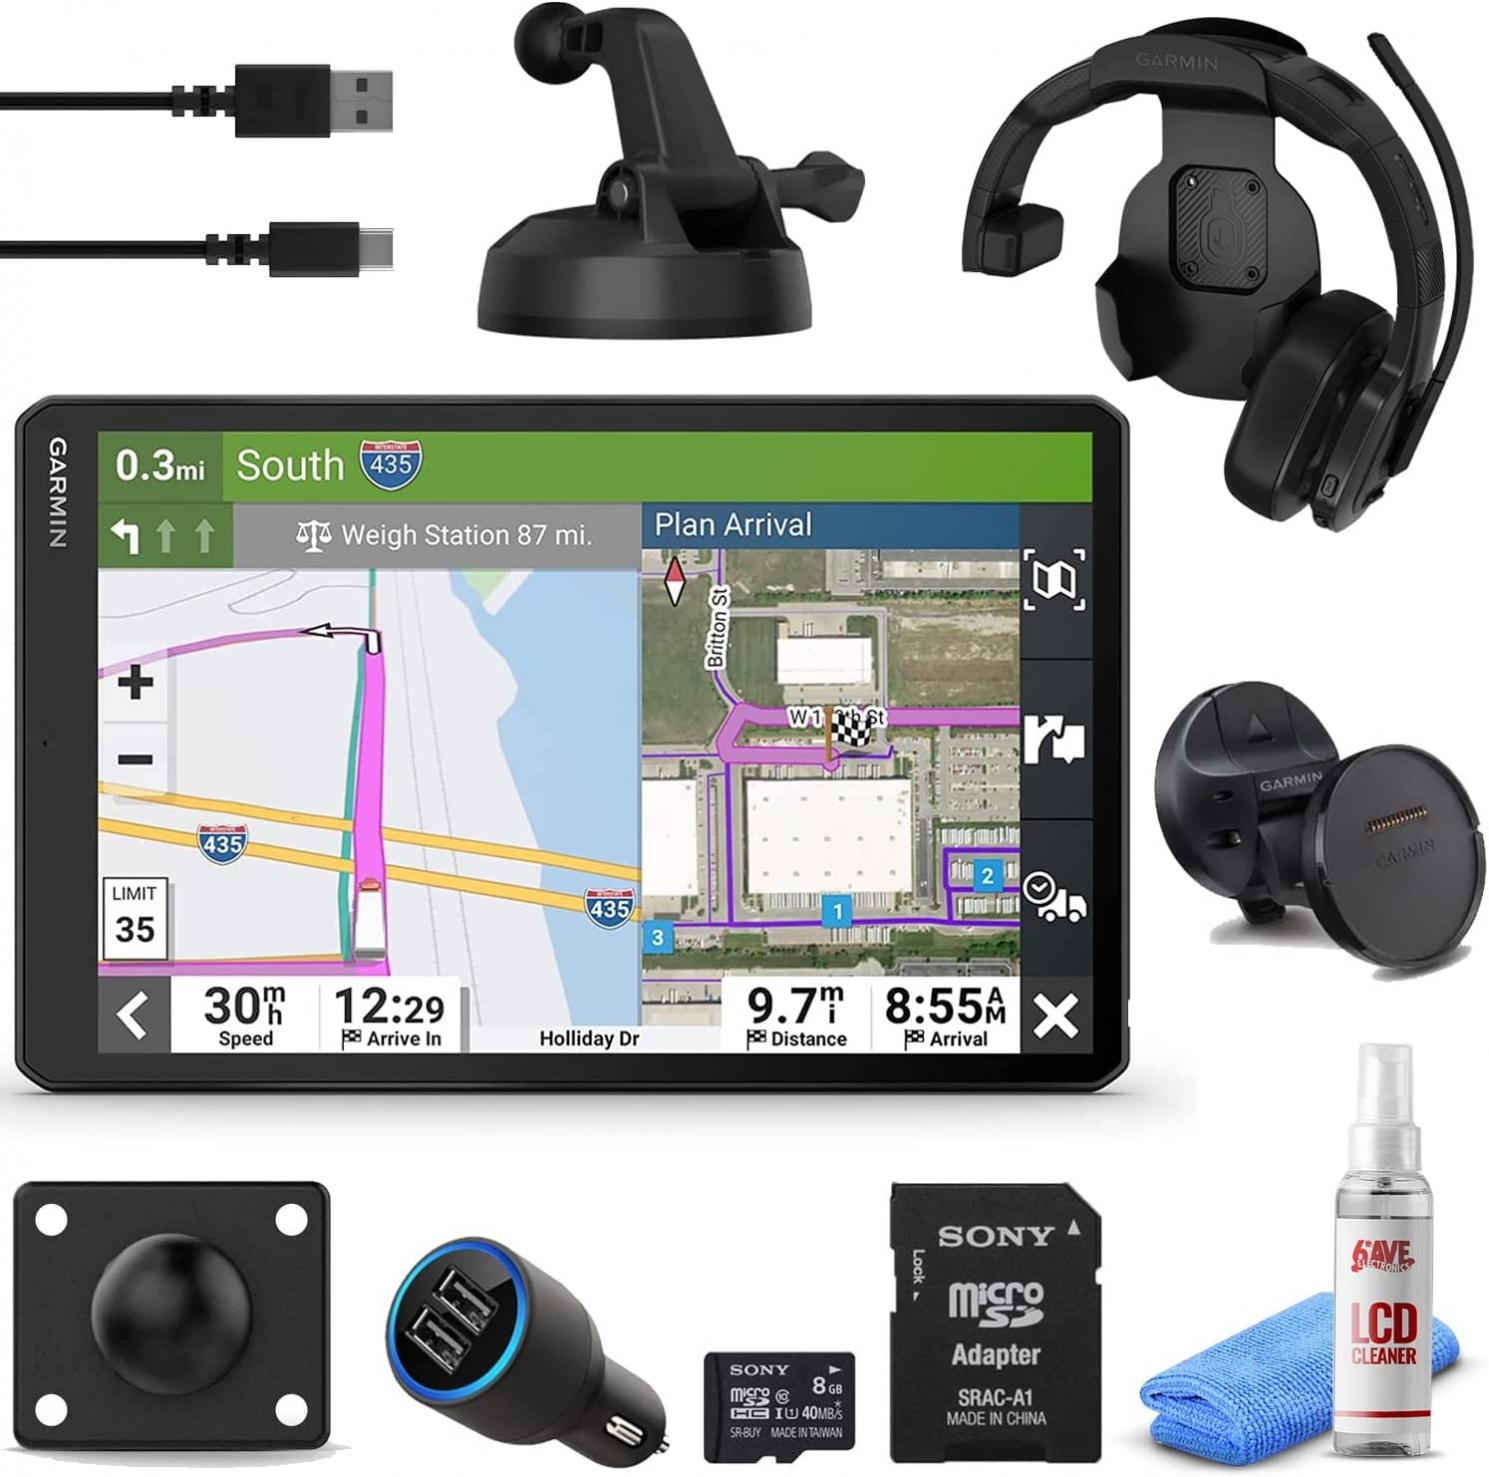 Garmin Dezl OTR1010, Extra-Large, Easy-to-Read 10" GPS Truck Navigator,Custom Truck Routing, Birdseye Satellite Imagery, Garmin Dezl Headset with 8GB Micro SD Card, USB Car Adapter & 6Ave Cleaning Kit